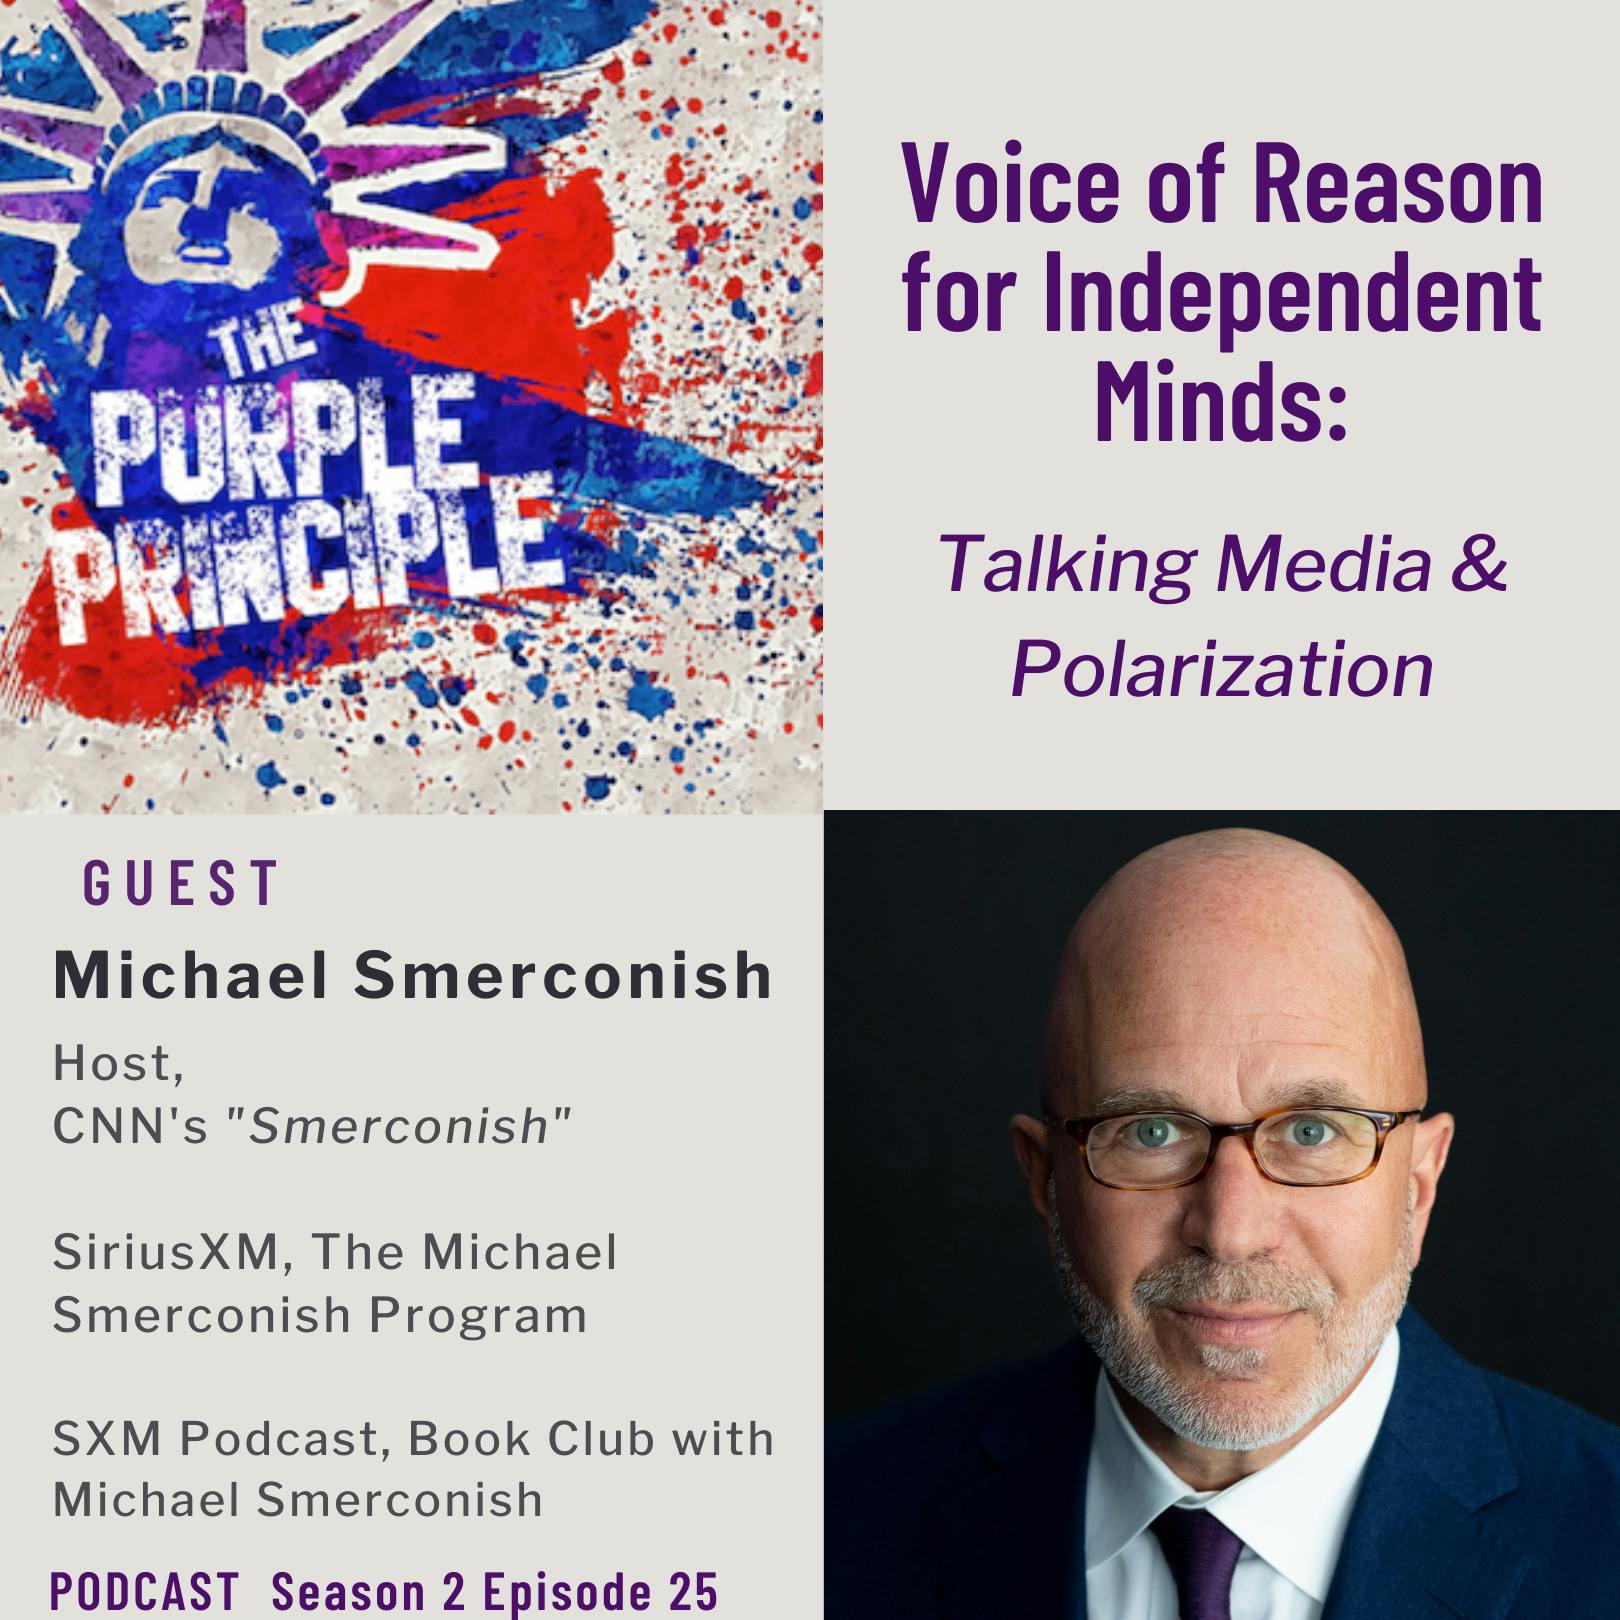 Voice of Reason for Independent Minds: Talking Media & Polarization with CNN's Michael Smerconish